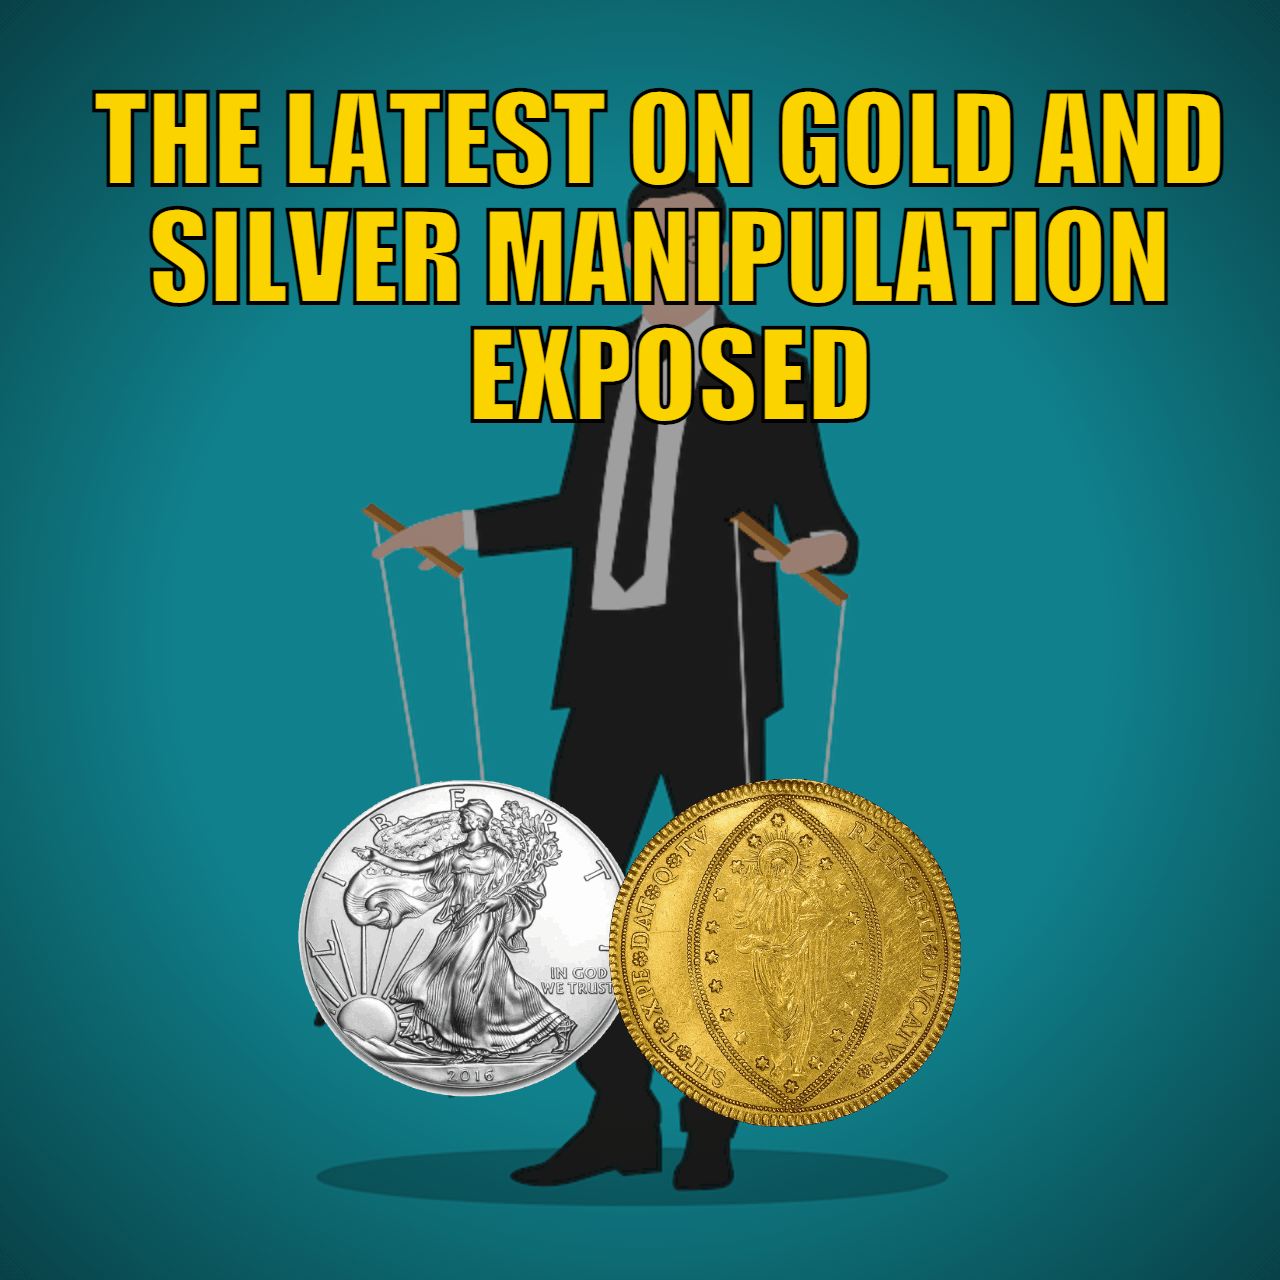 The Latest on Gold and Silver Manipulation Exposed